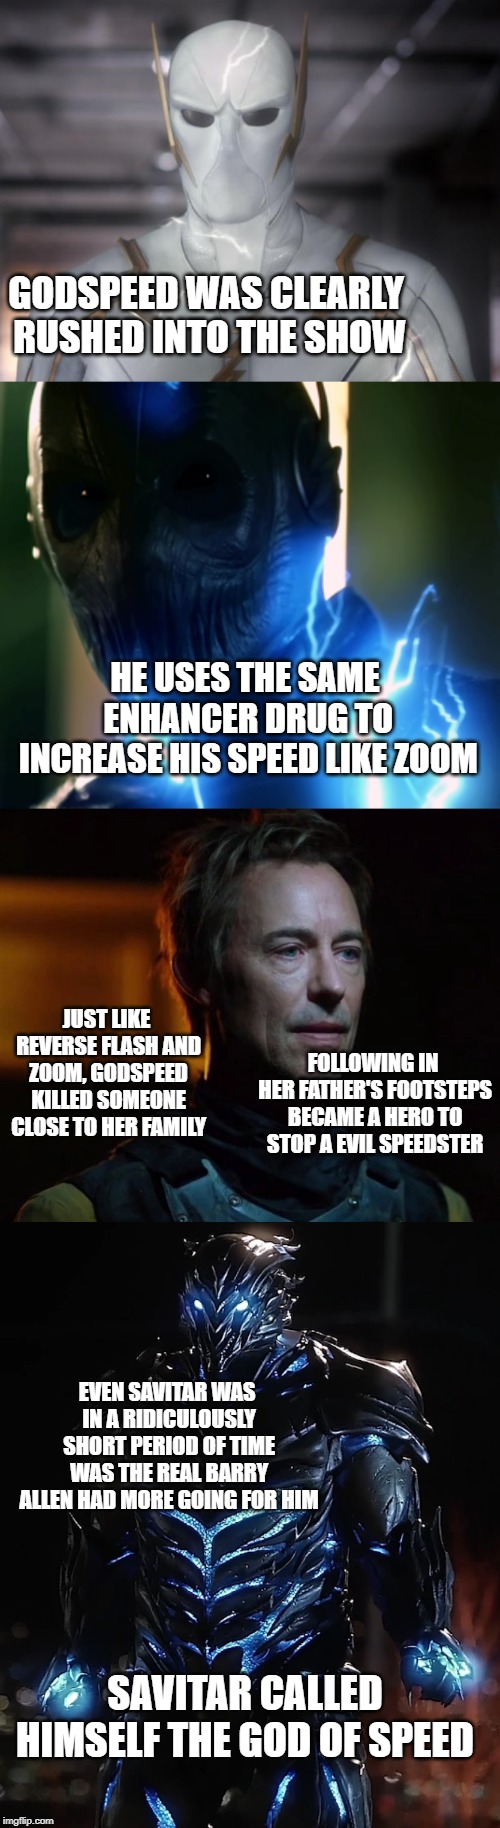 GODSPEED WAS CLEARLY RUSHED INTO THE SHOW; HE USES THE SAME ENHANCER DRUG TO INCREASE HIS SPEED LIKE ZOOM; JUST LIKE REVERSE FLASH AND ZOOM, GODSPEED KILLED SOMEONE CLOSE TO HER FAMILY; FOLLOWING IN HER FATHER'S FOOTSTEPS BECAME A HERO TO STOP A EVIL SPEEDSTER; EVEN SAVITAR WAS IN A RIDICULOUSLY SHORT PERIOD OF TIME WAS THE REAL BARRY ALLEN HAD MORE GOING FOR HIM; SAVITAR CALLED HIMSELF THE GOD OF SPEED | image tagged in dc comics,the flash,speed | made w/ Imgflip meme maker